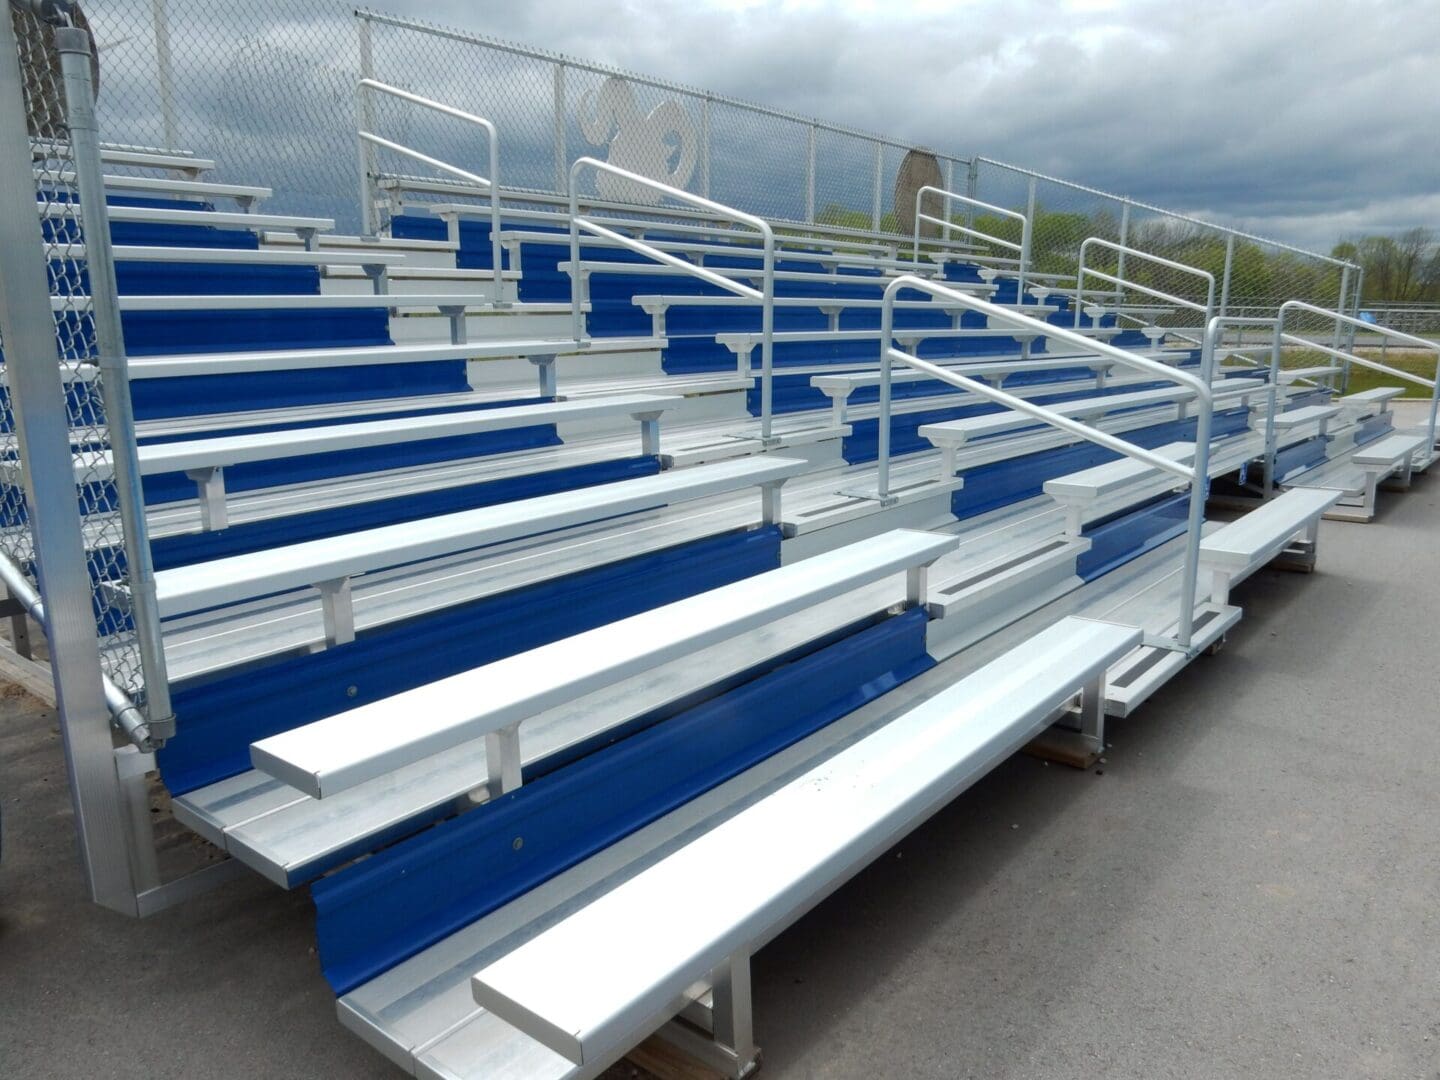 A group of bleachers with blue seats in the middle.